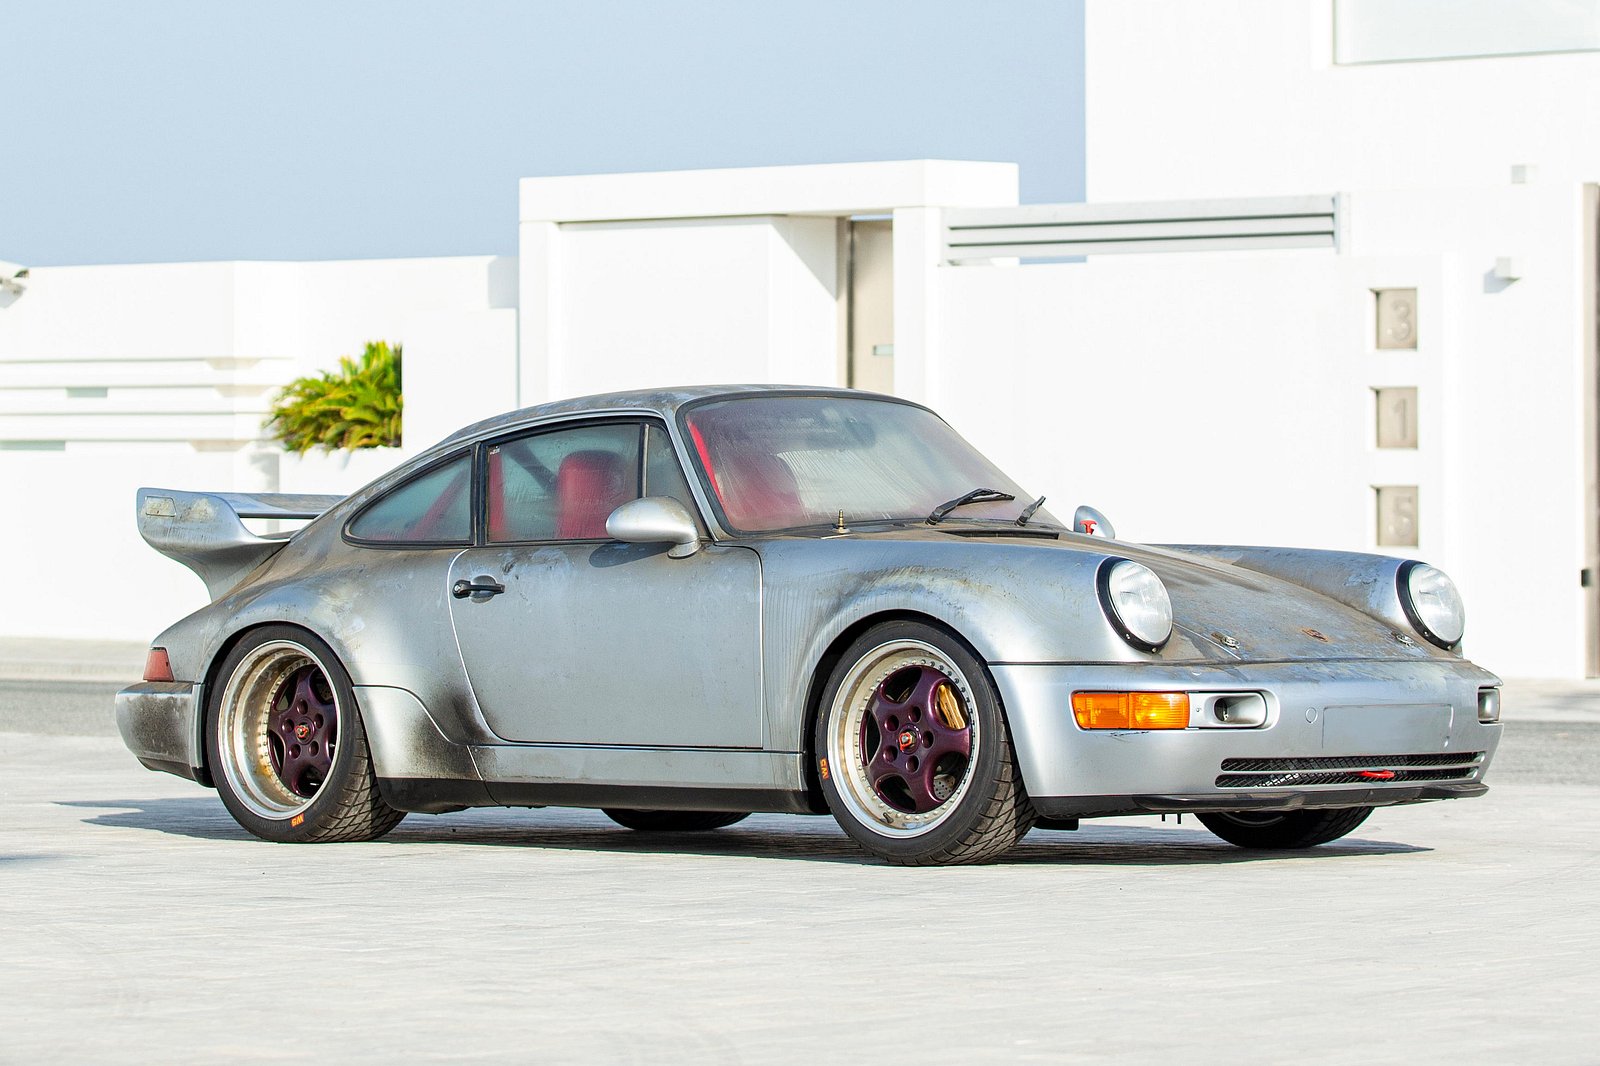 photo of 1993 Porsche 911 Carrera RSR 3.8 'Strassenversion' With 6 Miles On The Clock Is The Ultimate Porsche 964 image